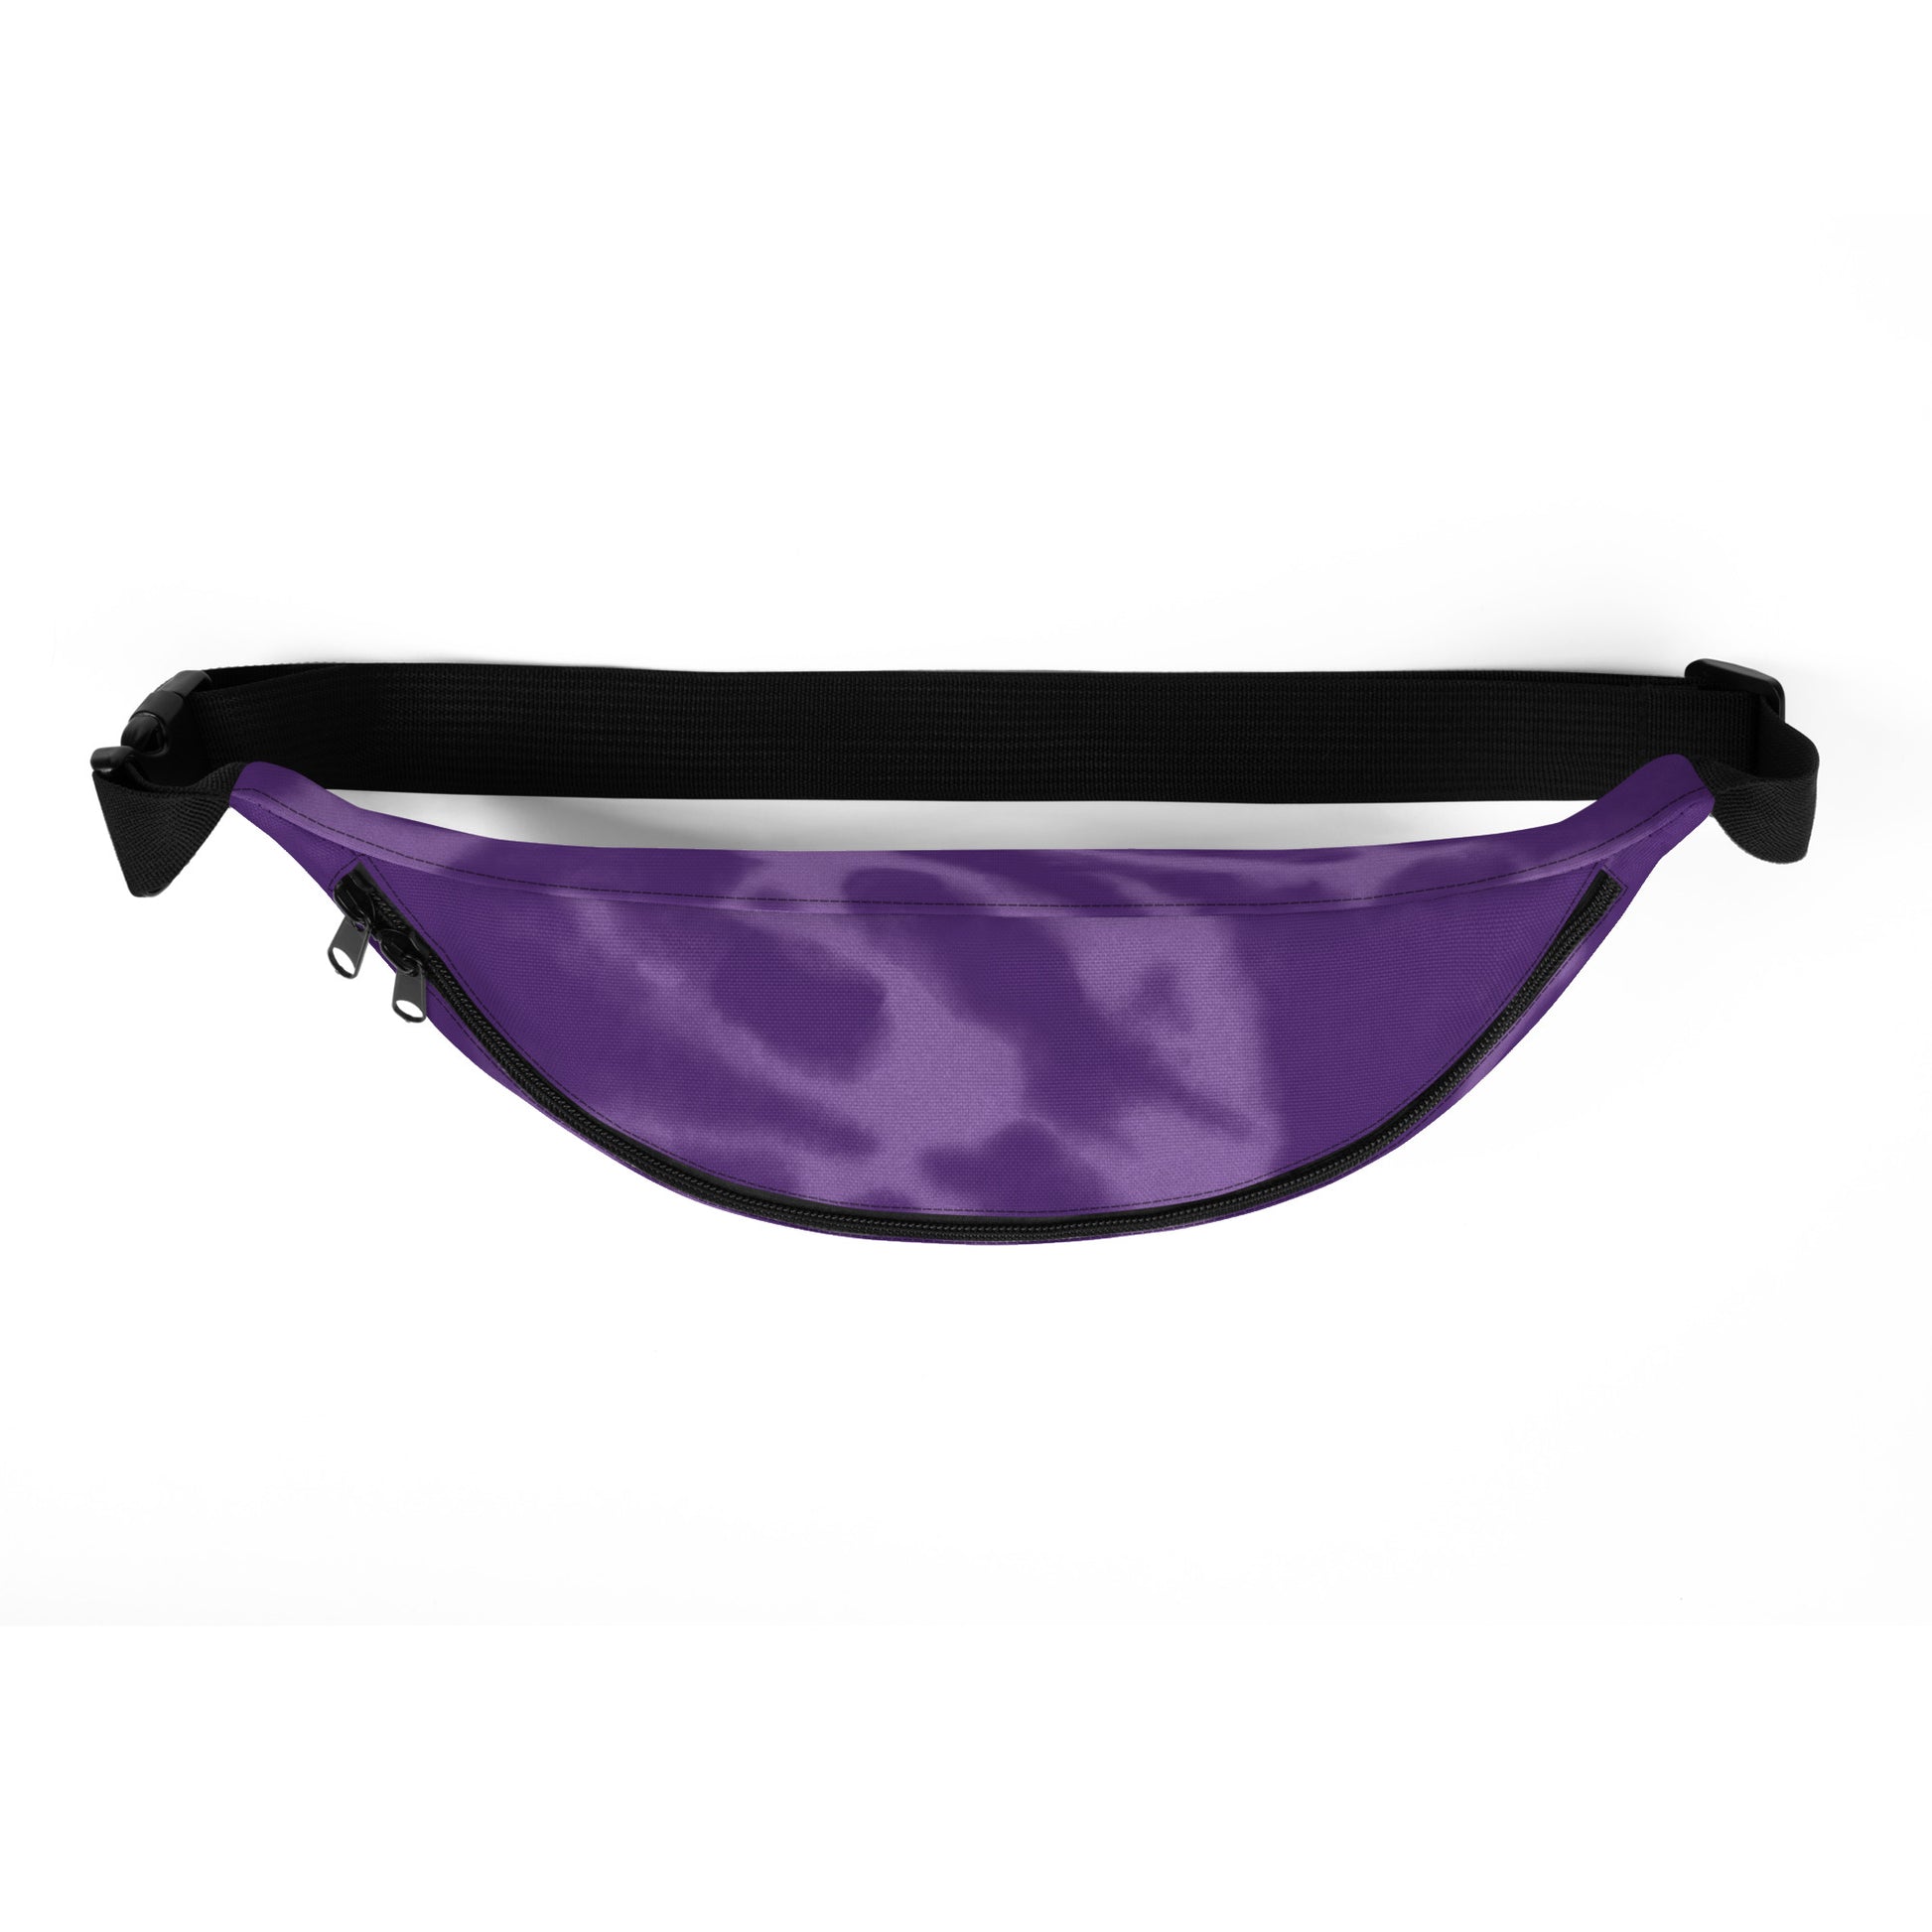 Travel Gift Fanny Pack - Purple Tie-Dye • MAD Madrid • YHM Designs - Image 08